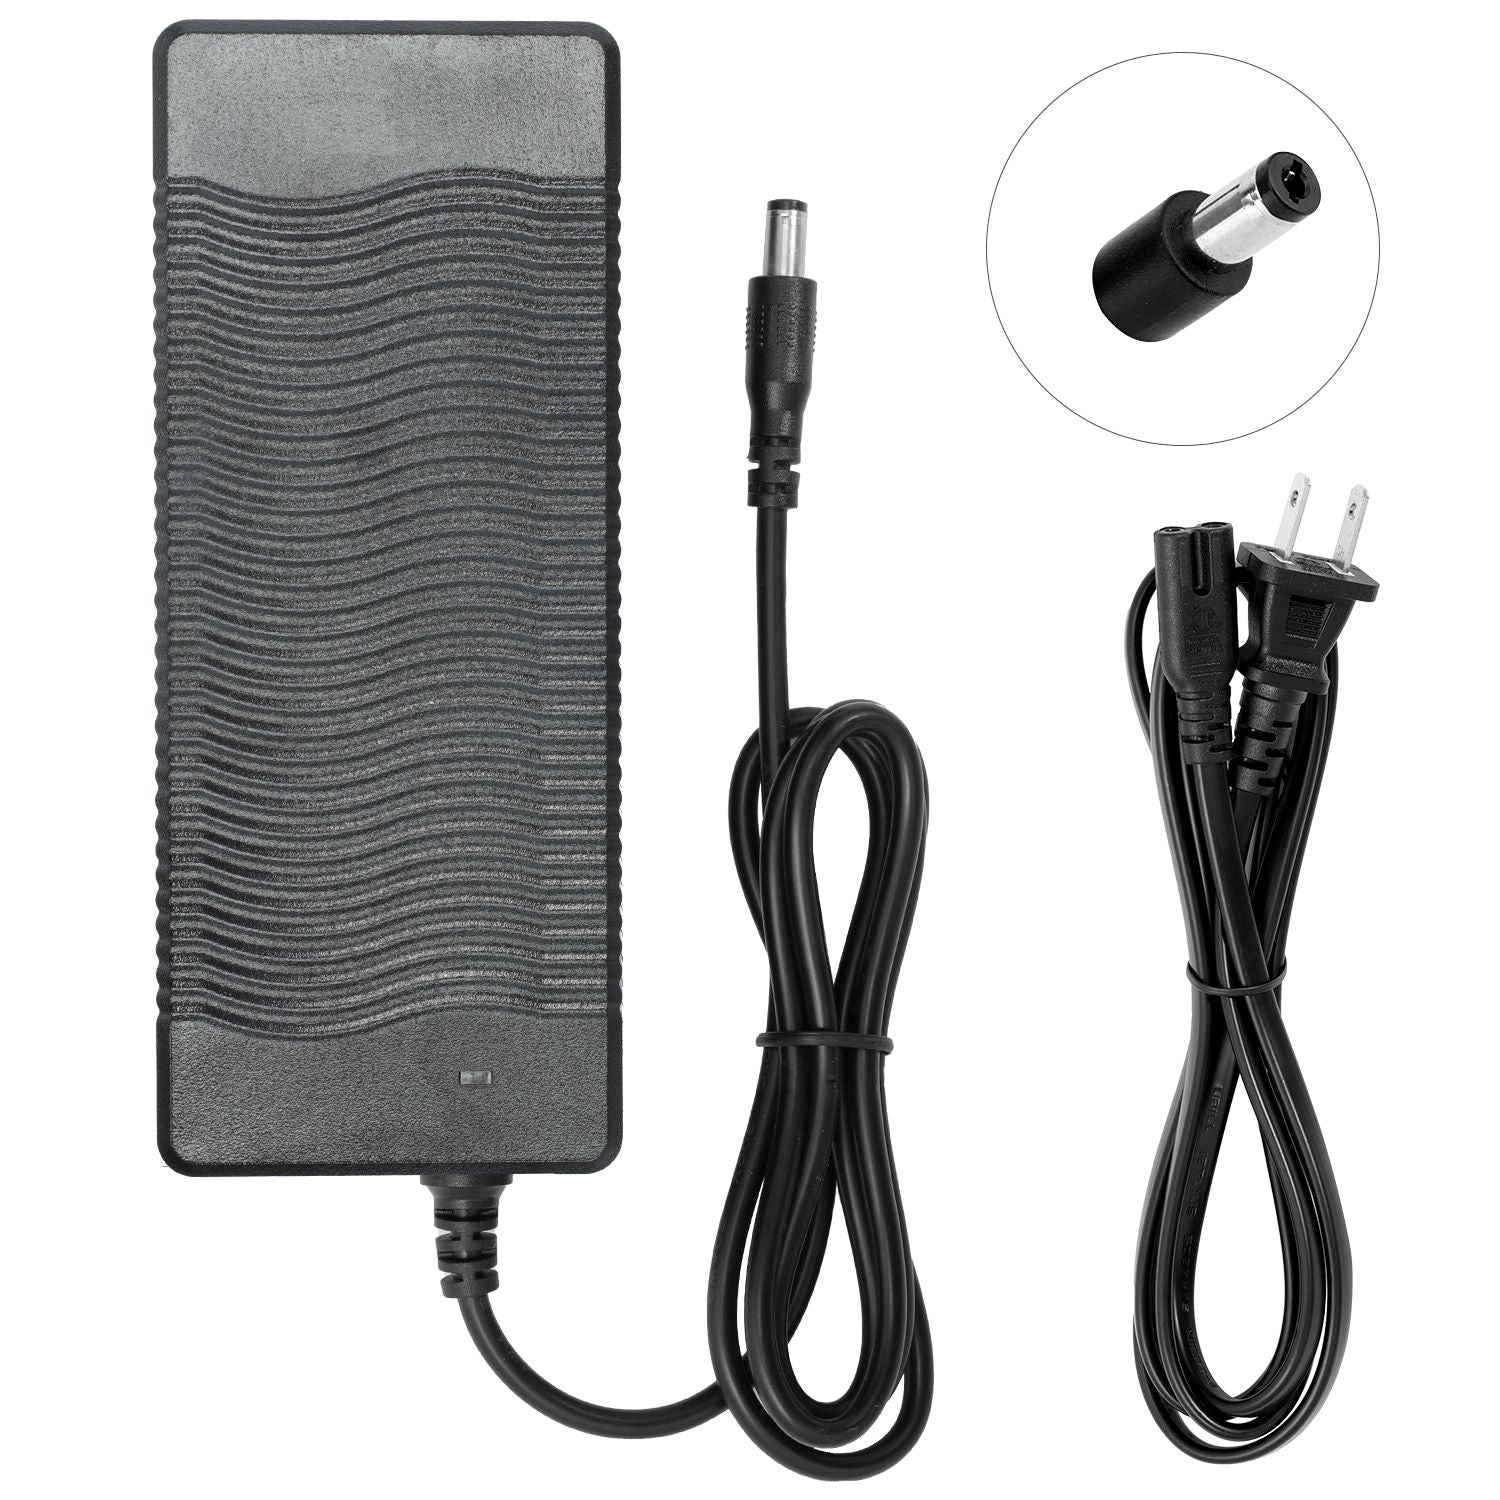 Charger for Blix Packa Genie Electric Bike